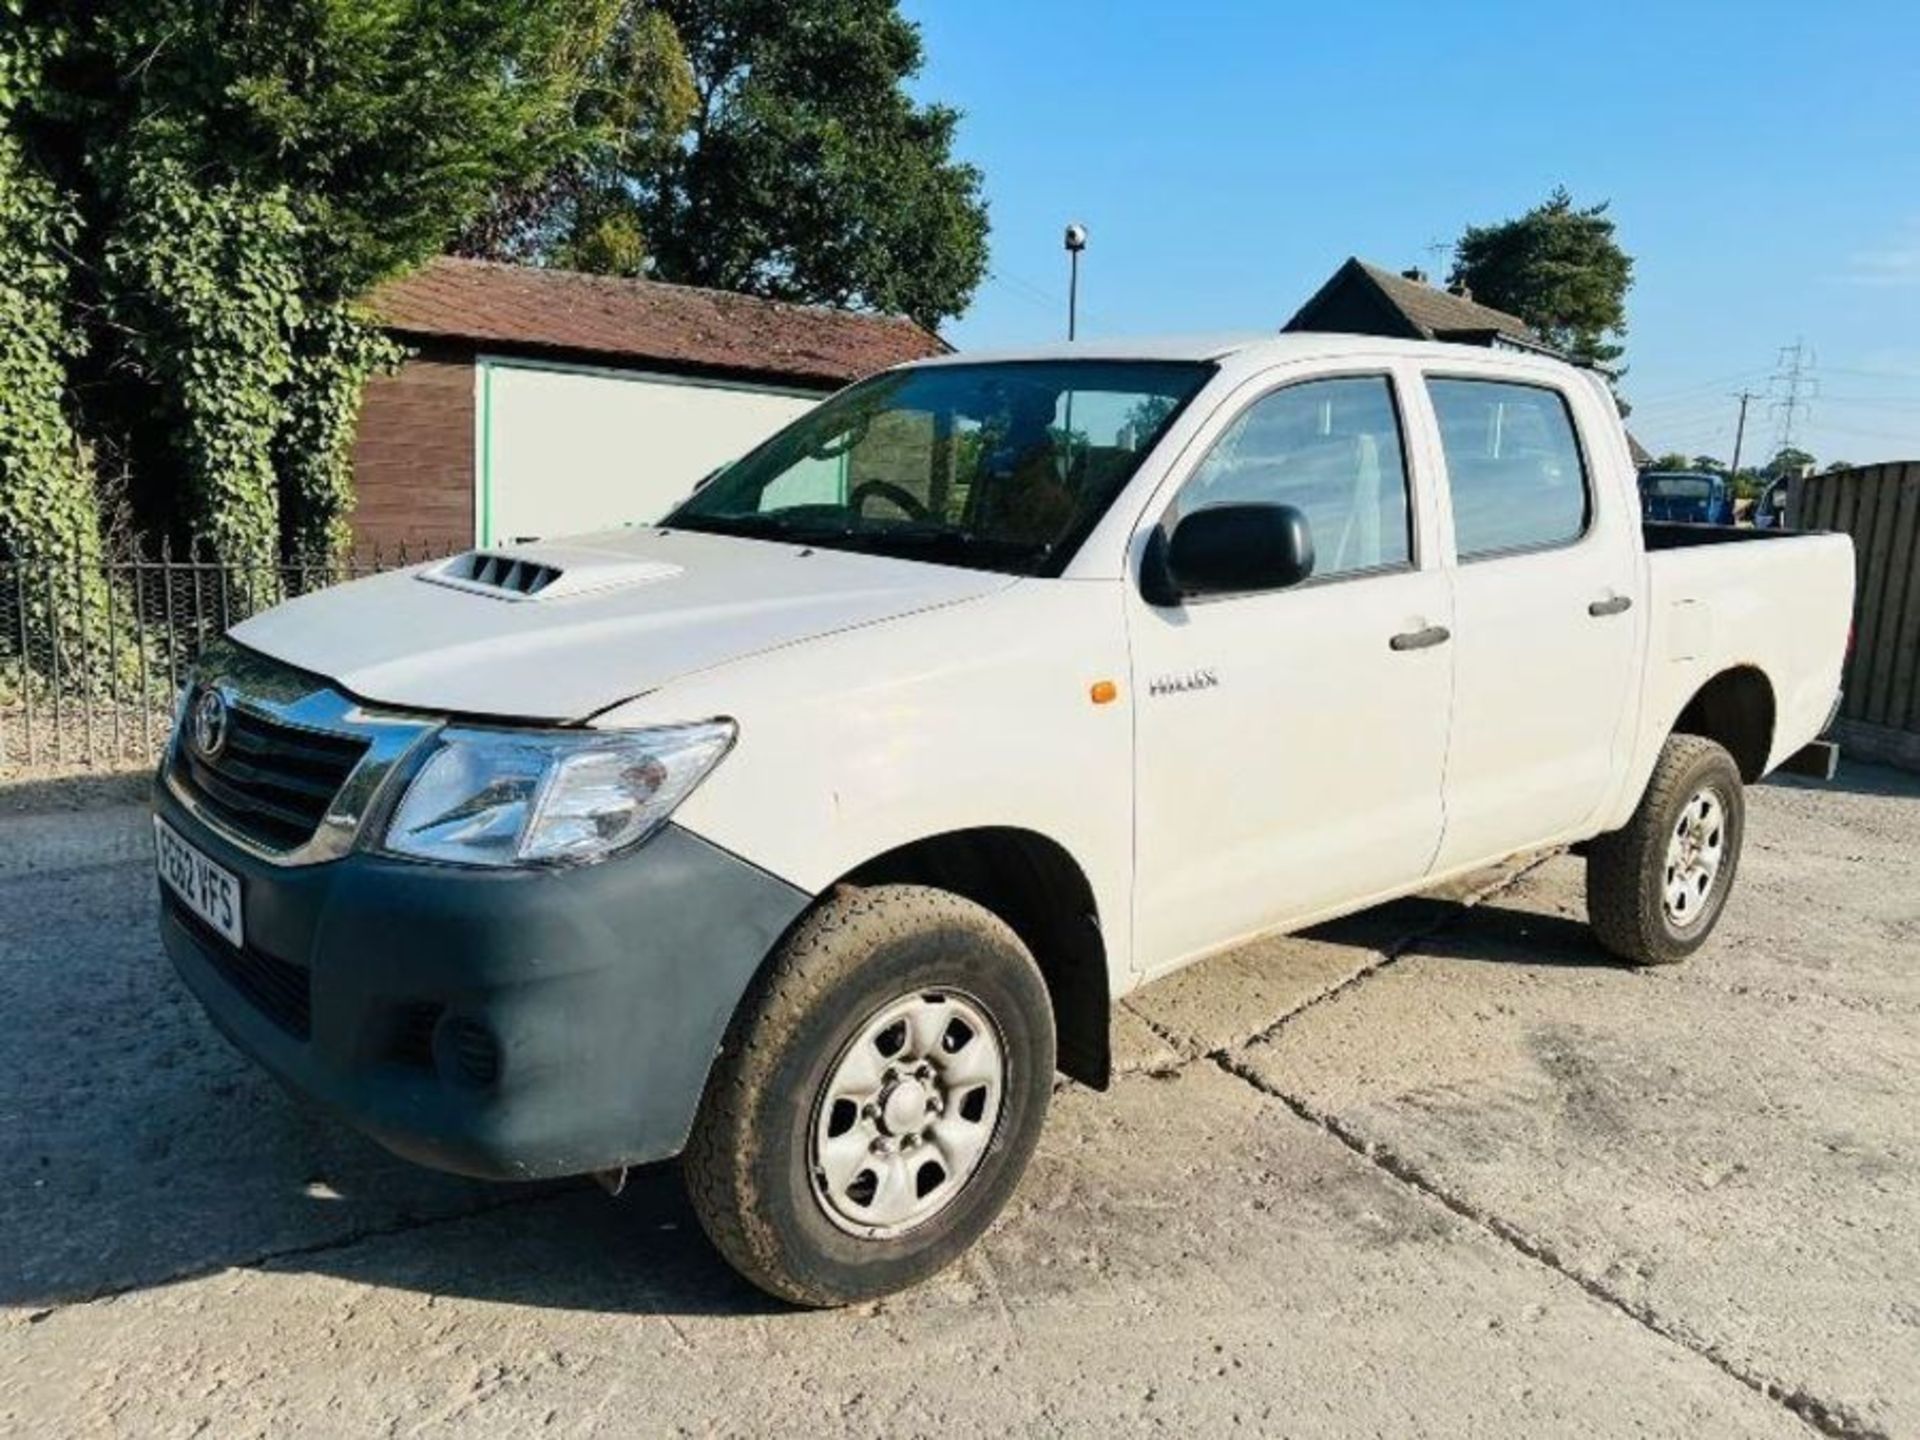 TOYOTA HILUX 2.5L DOUBLE CAB PICK UP *YEAR 2012*